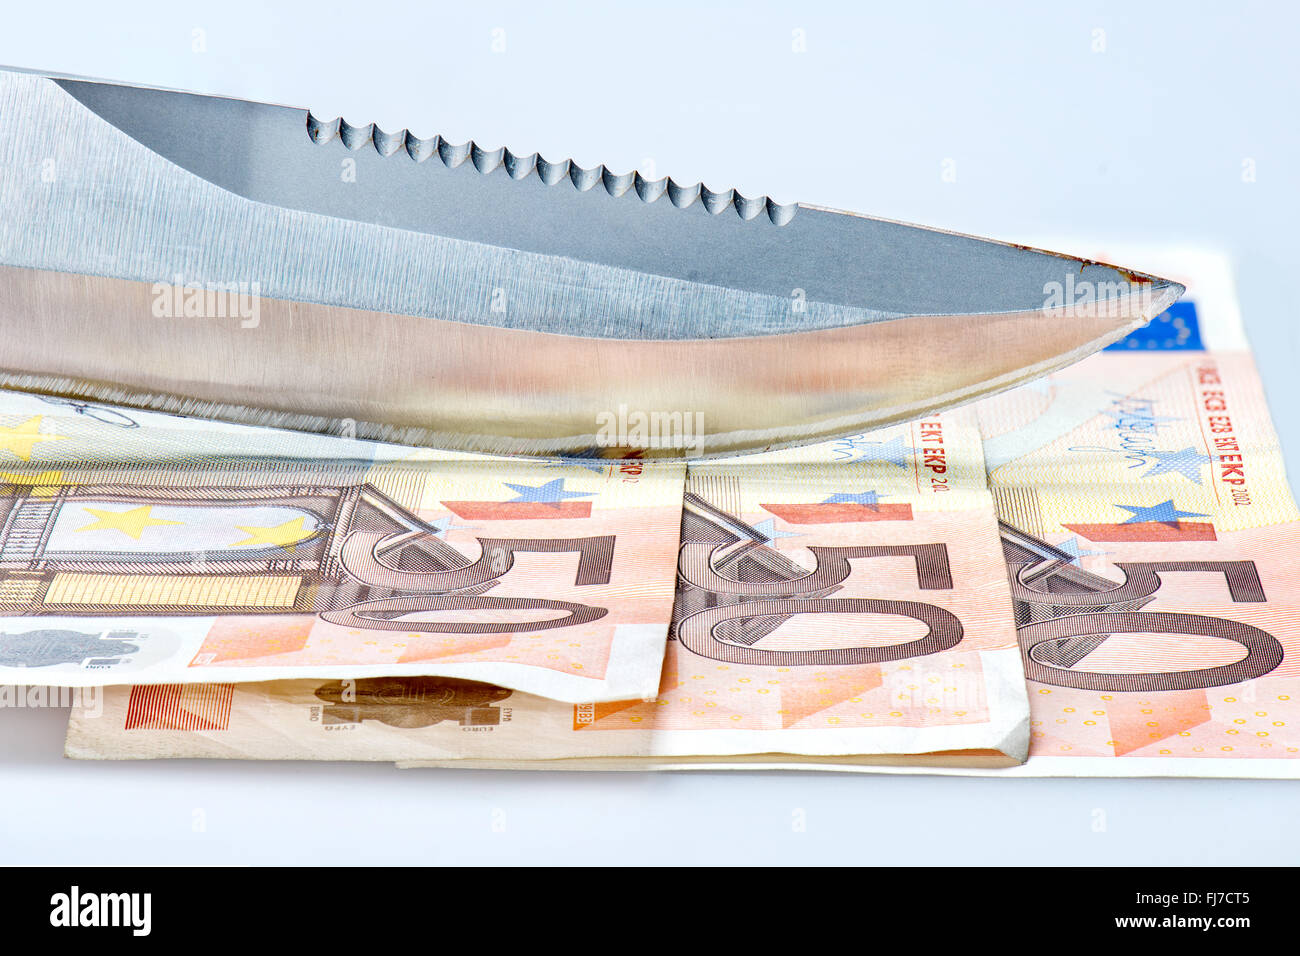 Knife with euro money note Stock Photo